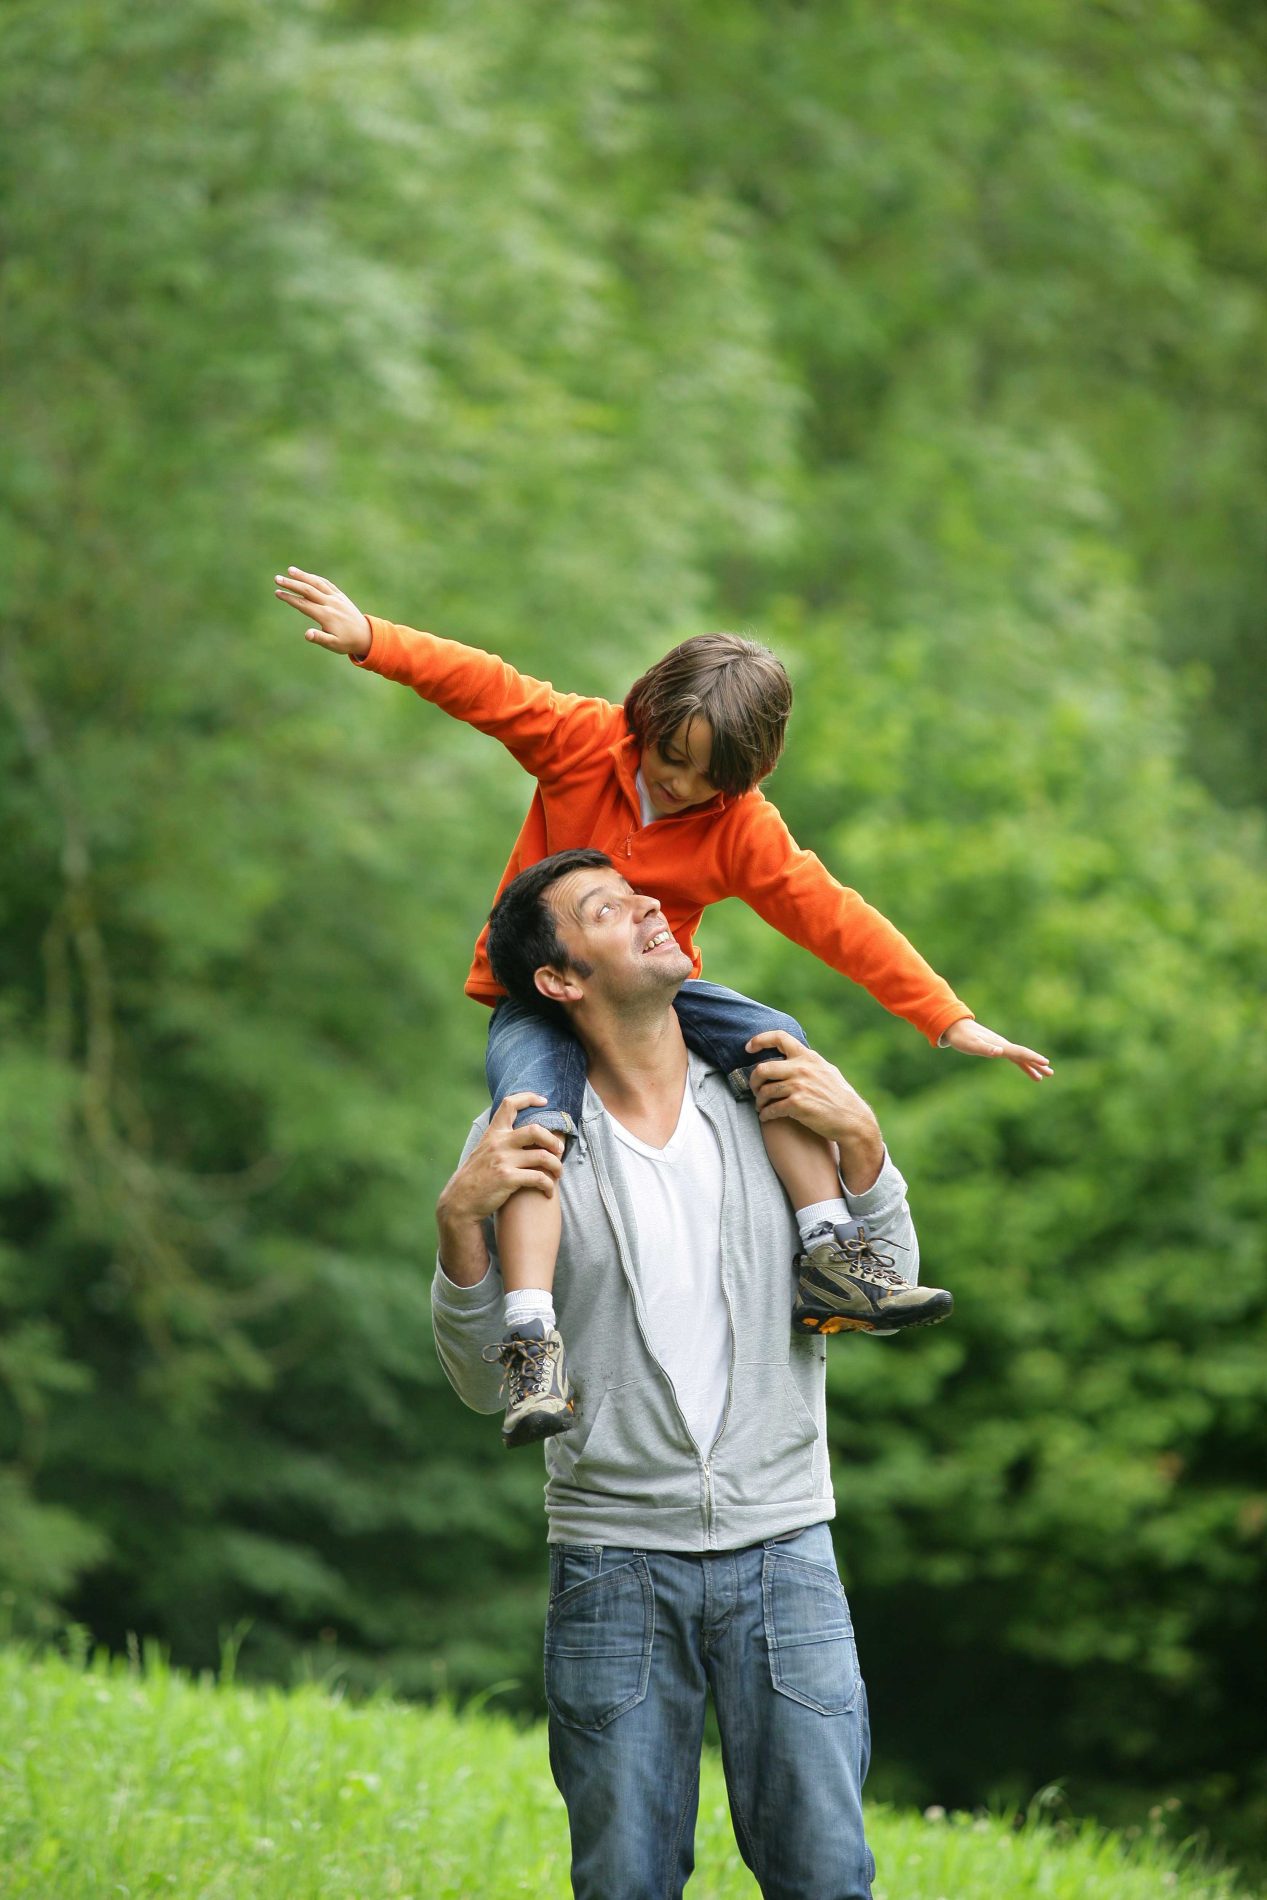 man with son on his shoulders outdoors walking through a grassy area.